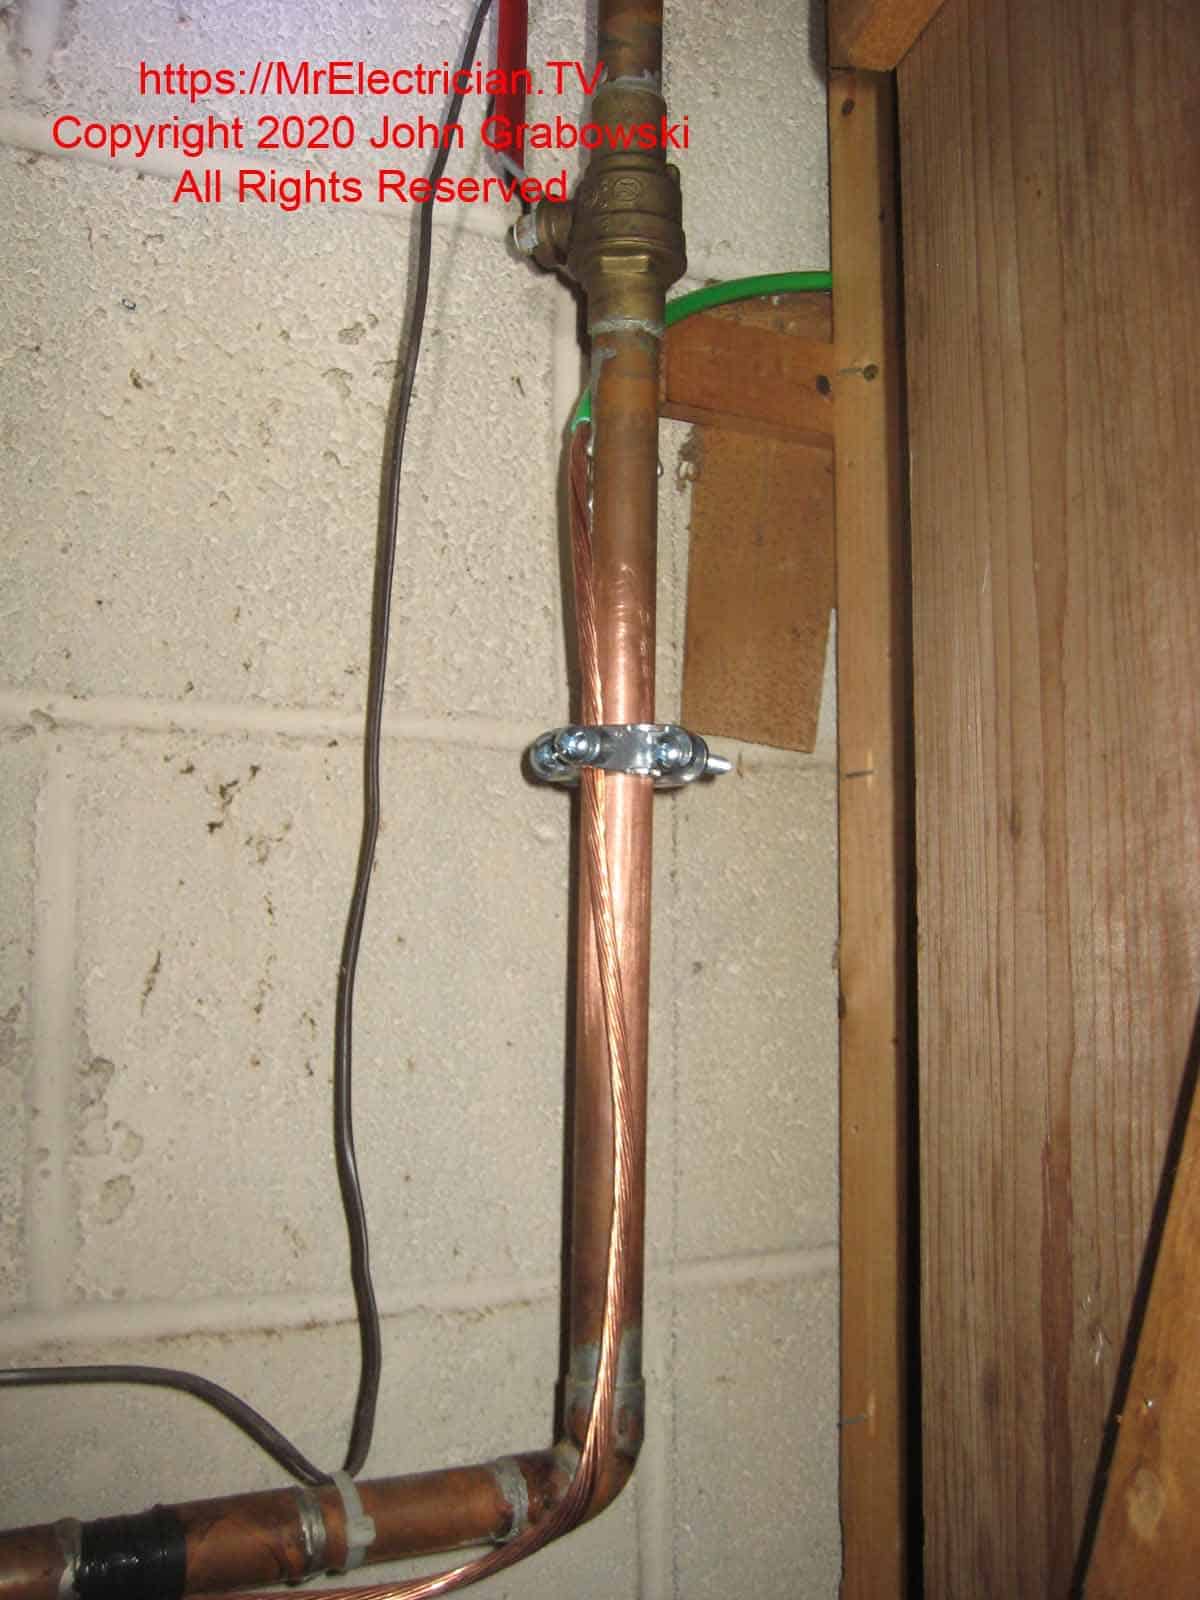 A clean copper pipe after the water meter with a new grounding clamp and a new grounding electrode conductor attached. From here, the grounding conductor goes to the main electrical panel or disconnect. CLICK HERE to see Water Pipe Ground Clamps at Amazon